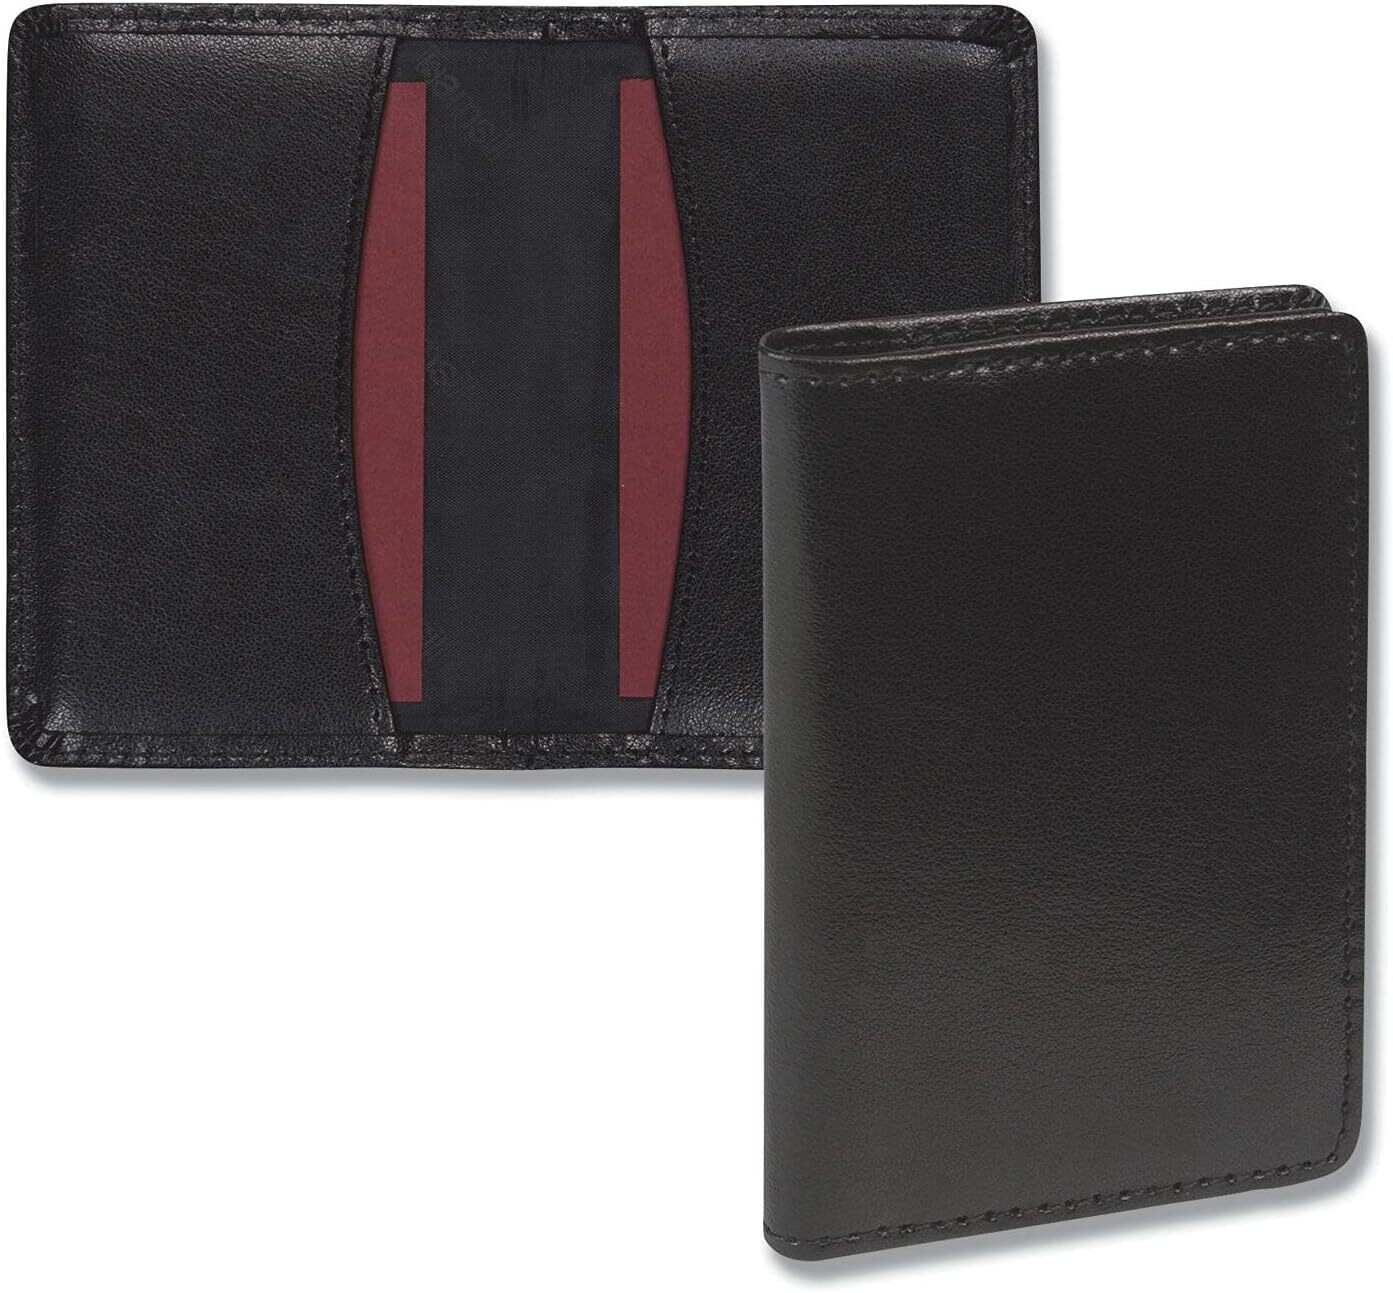 Samsill Leather Business Card Wallet, BK